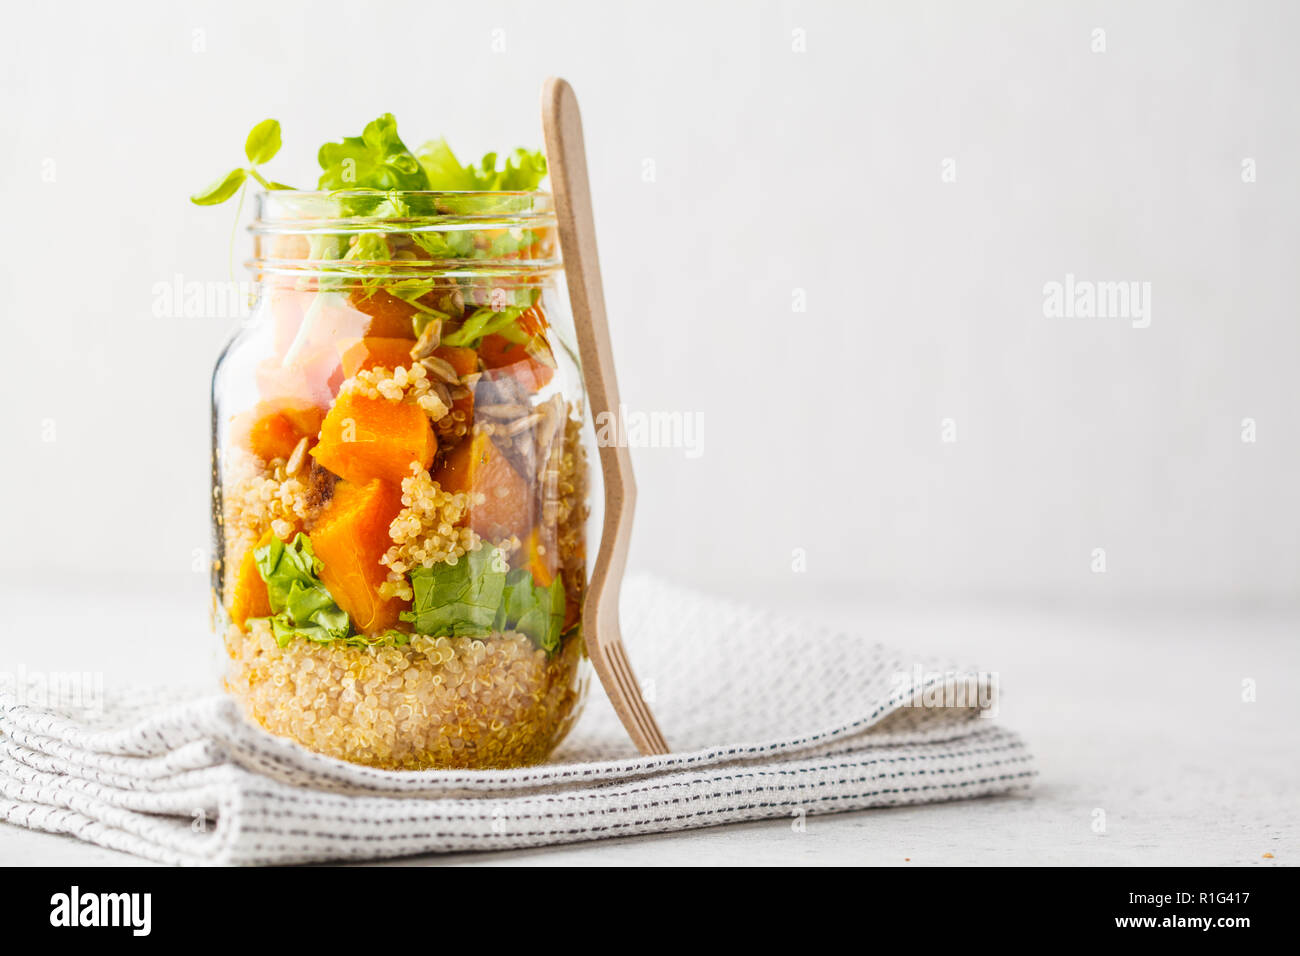 Pumpkin, quinoa salad in a jar on white background. Take away food, picnic food. Stock Photo